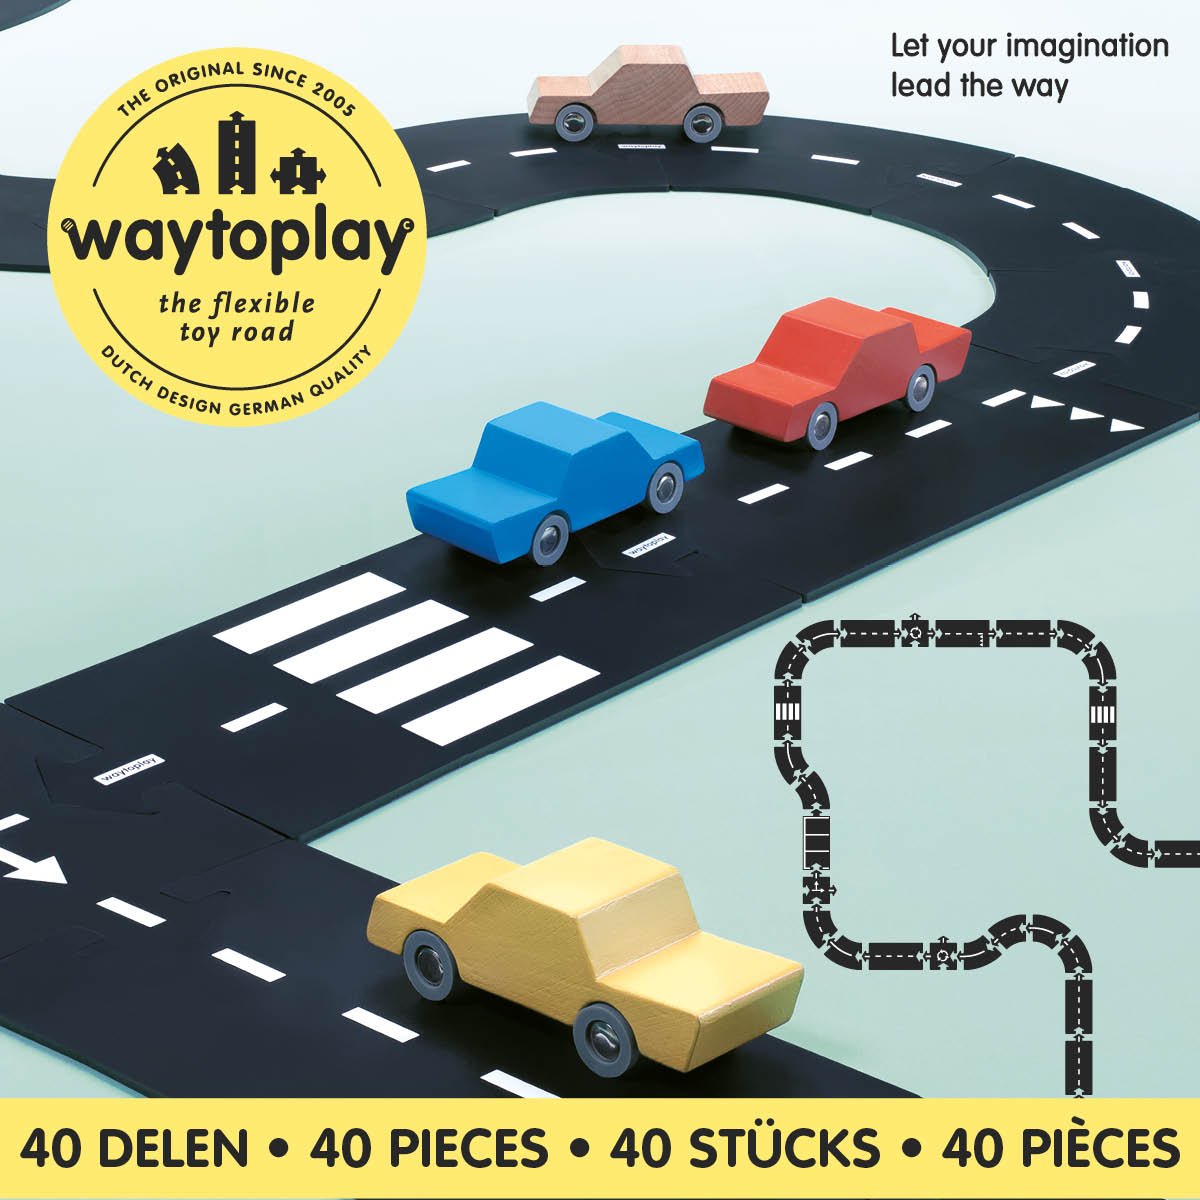 King of the Road - 40 pièces - way to play (Waytoplay) - circuit flexible